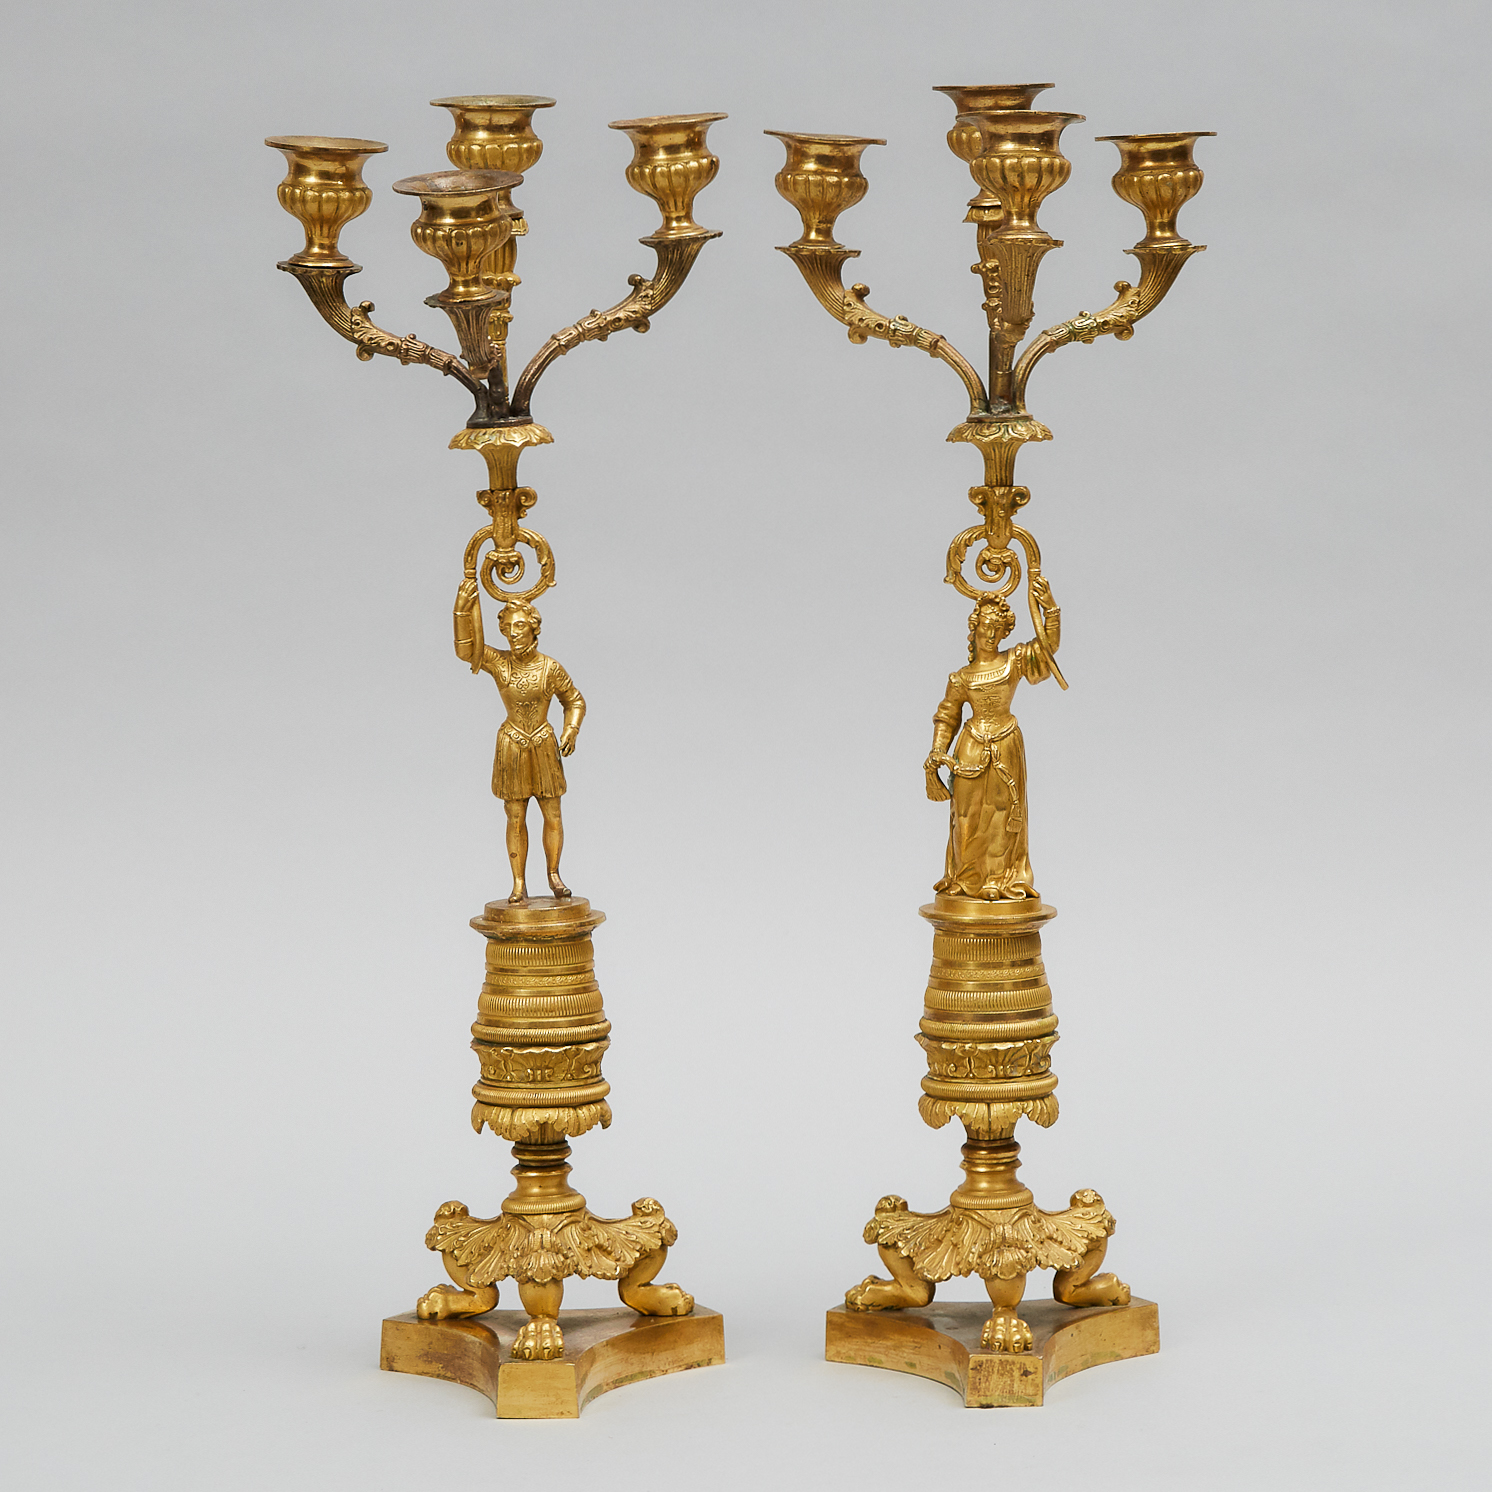 Pair of French Empire Gilt Bronze Figural Candlesticks, c.1830